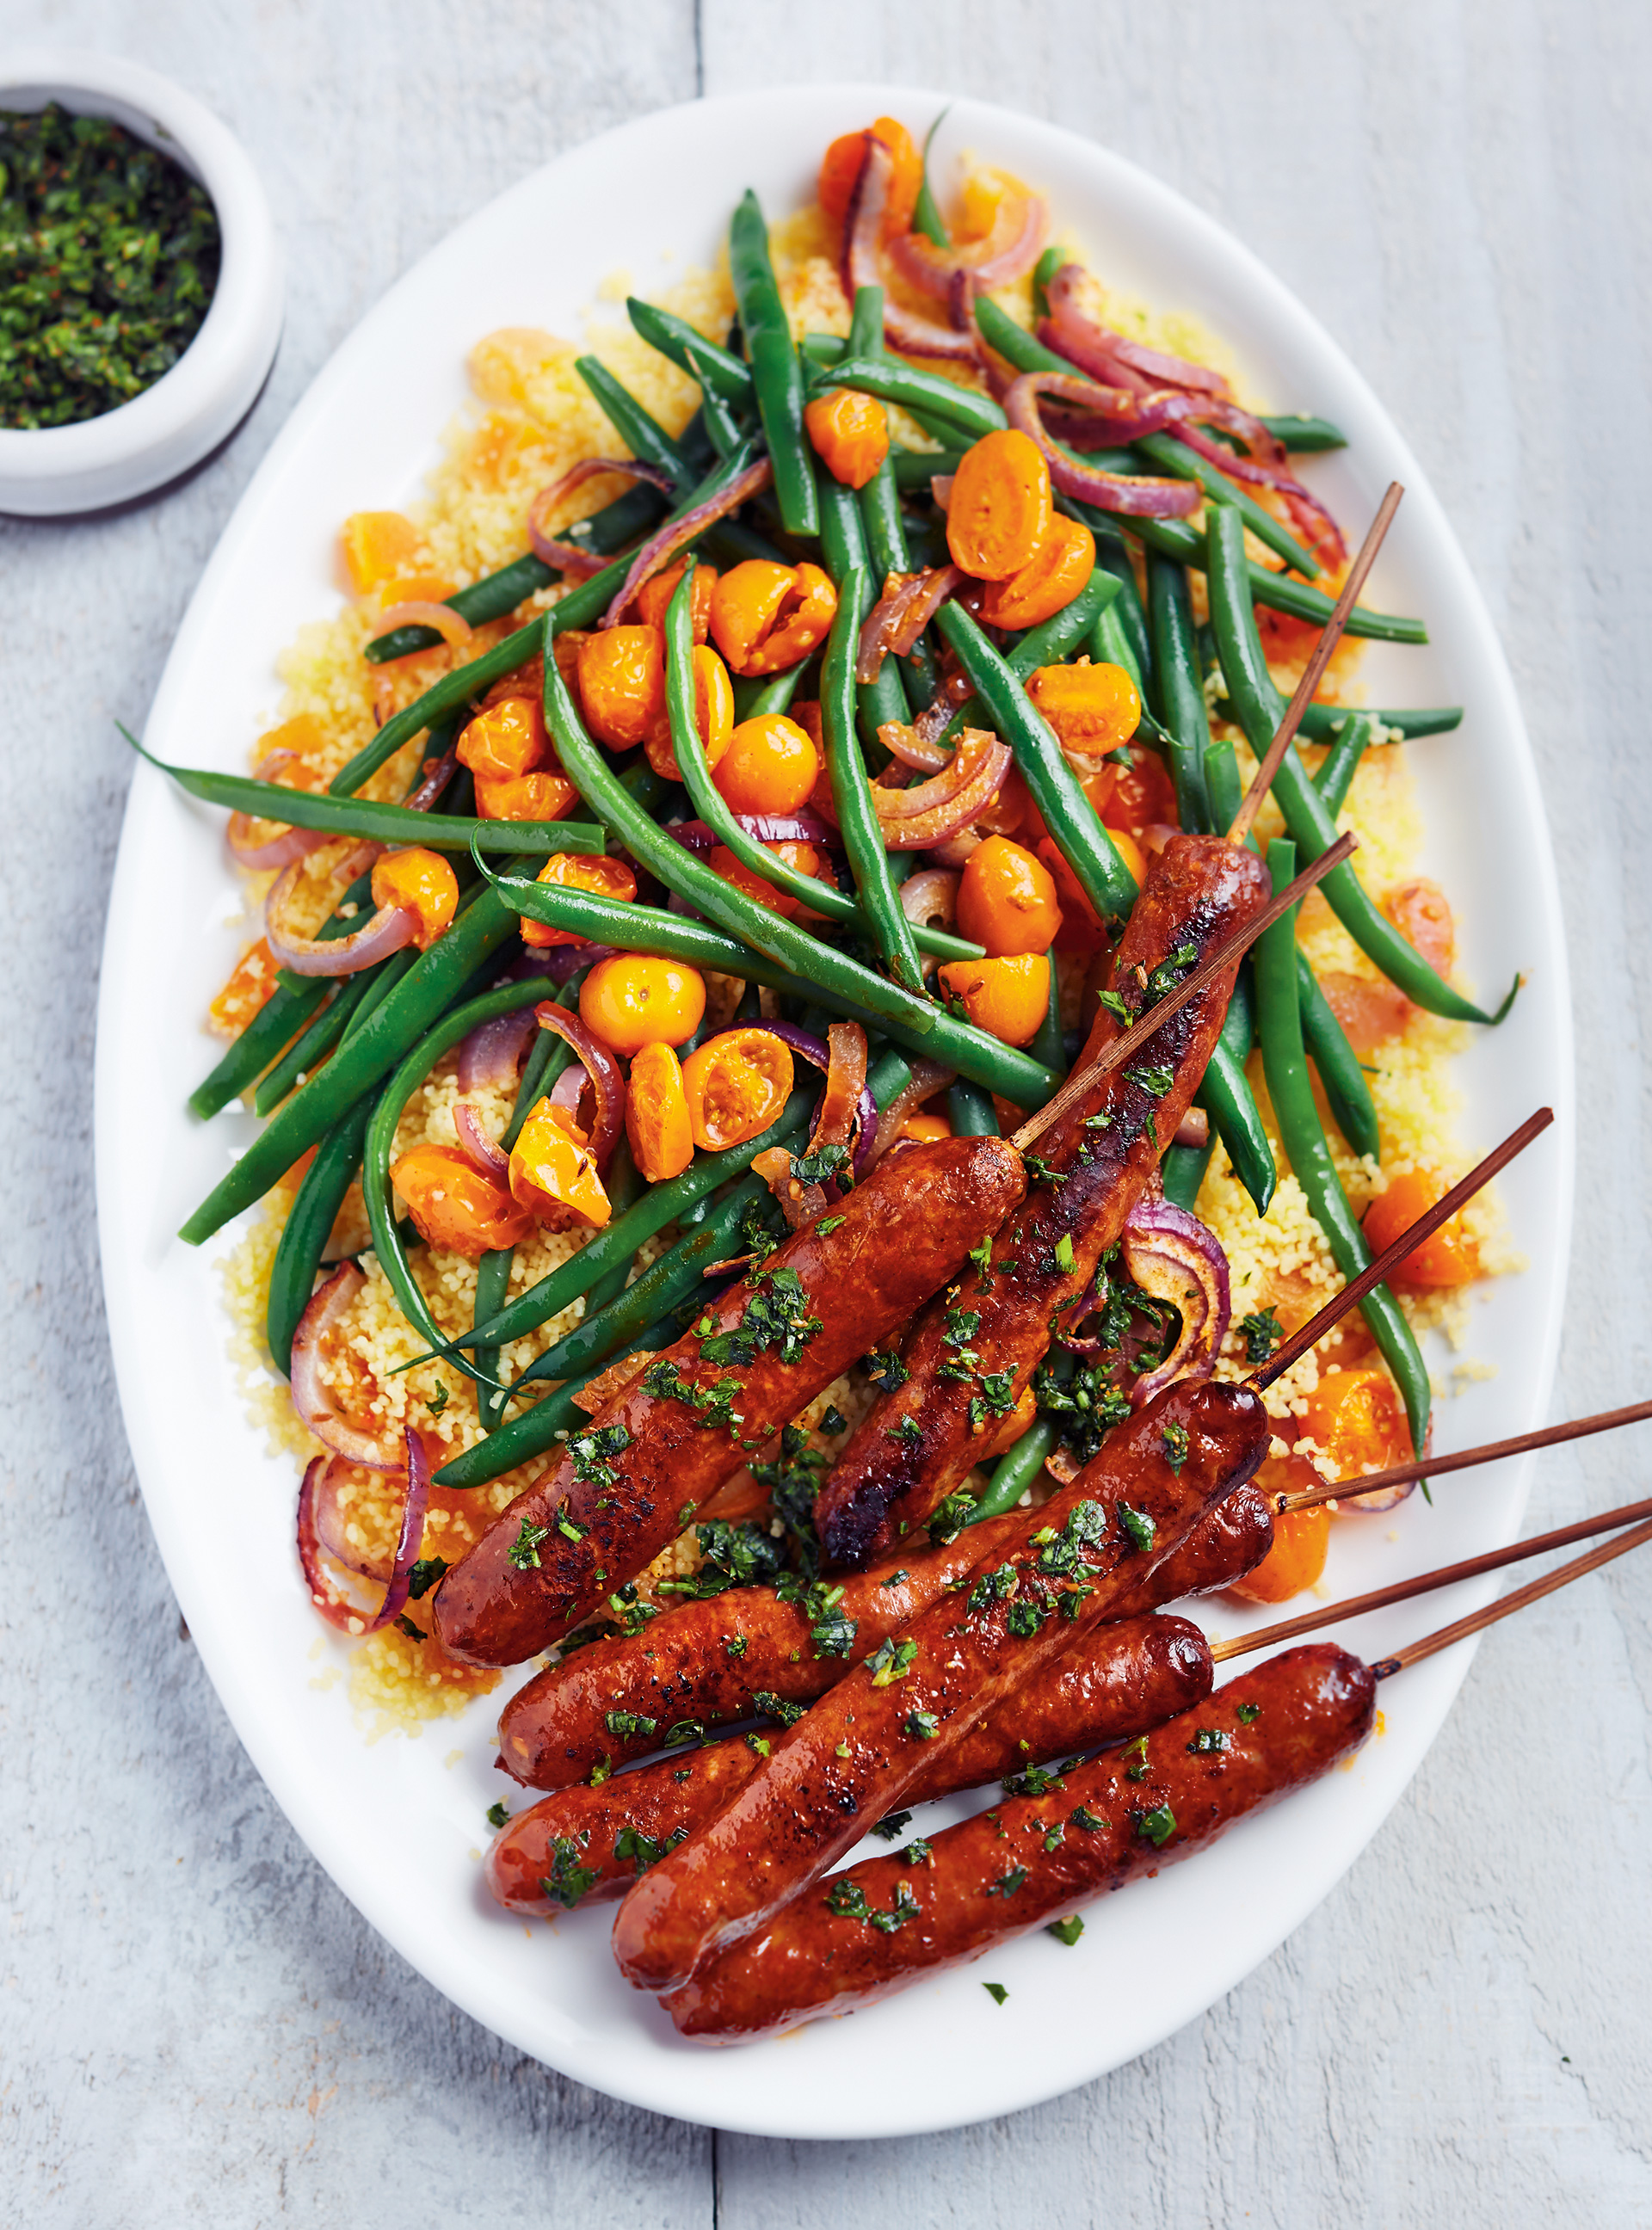 Warm Couscous Salad with Green Beans and Merguez Skewers